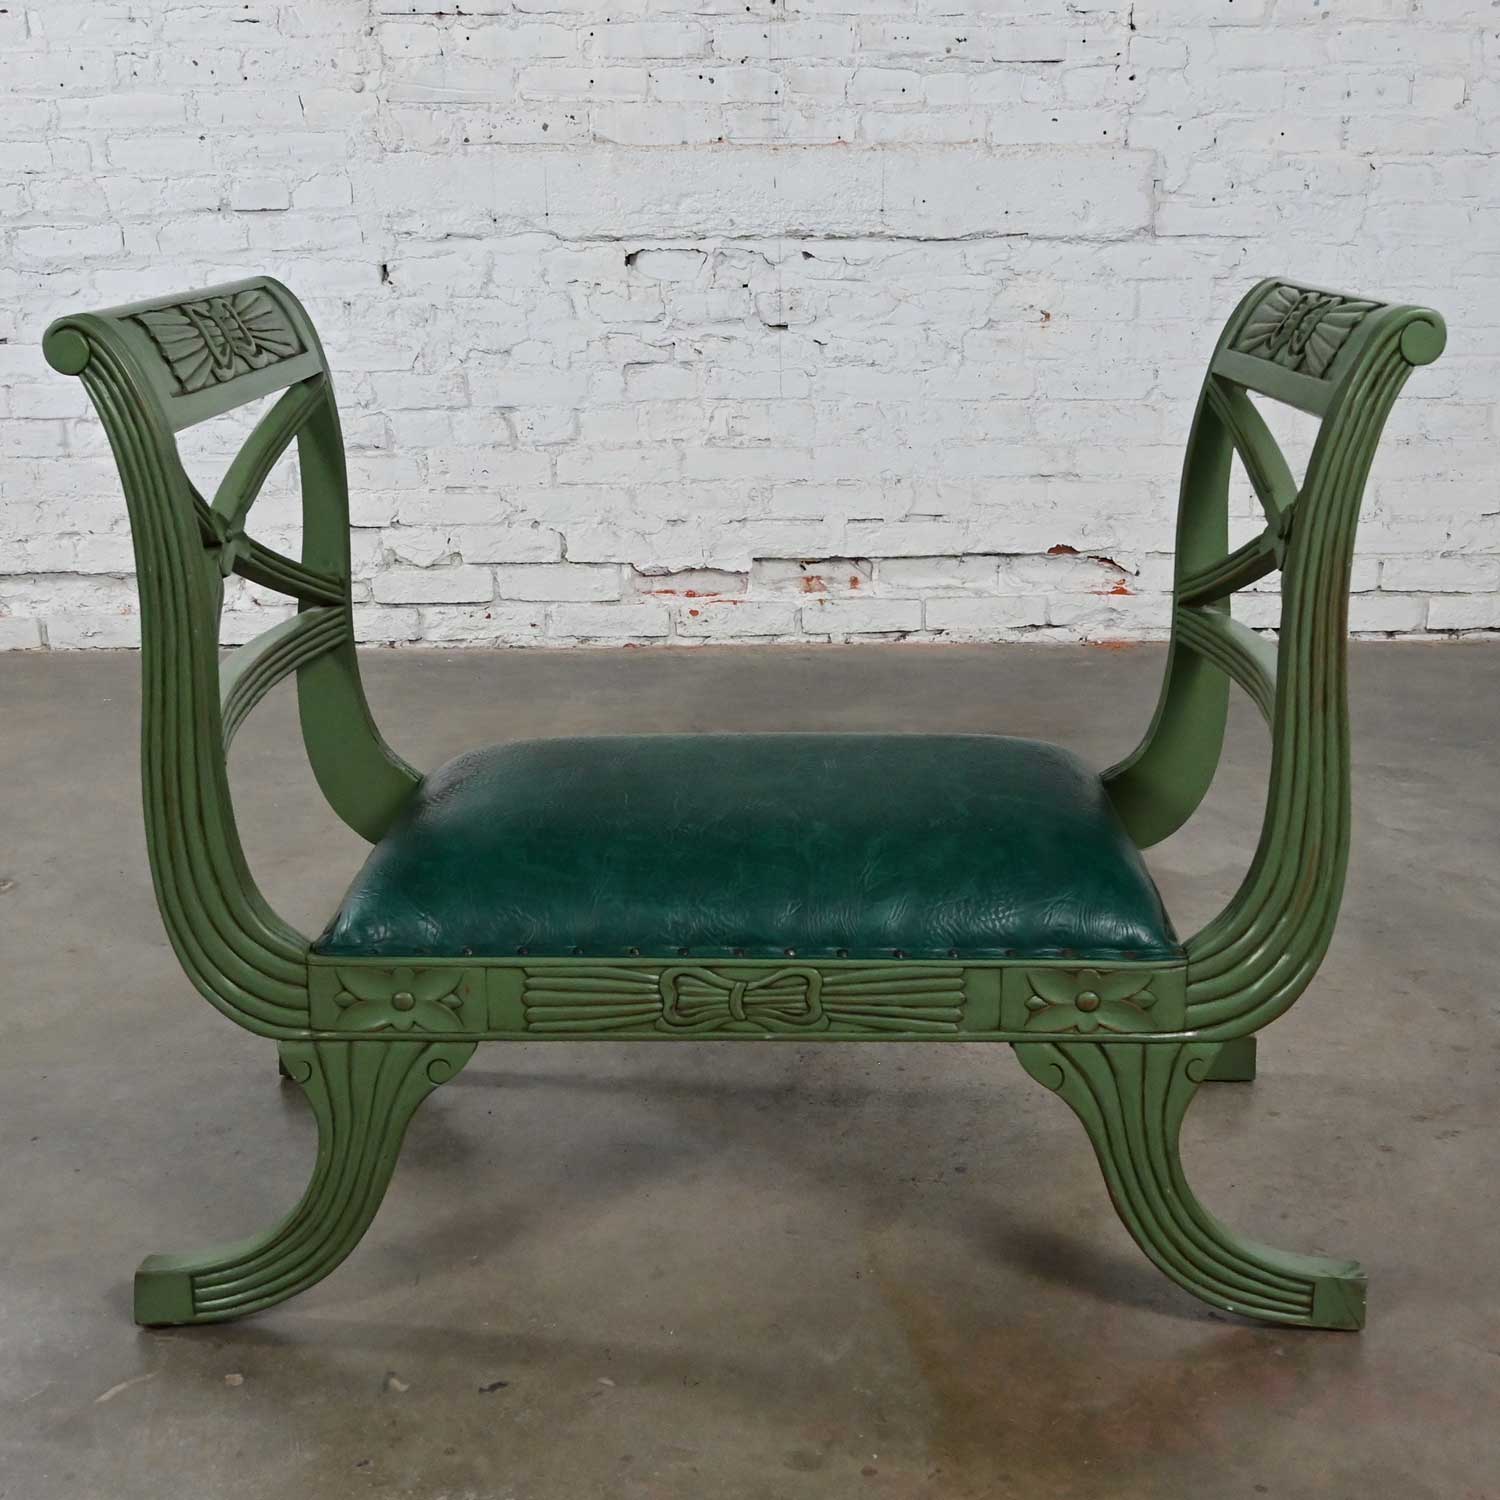 Fabulous vintage Neoclassic style hunter green textured faux leather short bench or vanity stool. Beautiful condition, keeping in mind that this is vintage and not new so will have signs of use and wear. There are no outstanding flaws that we have